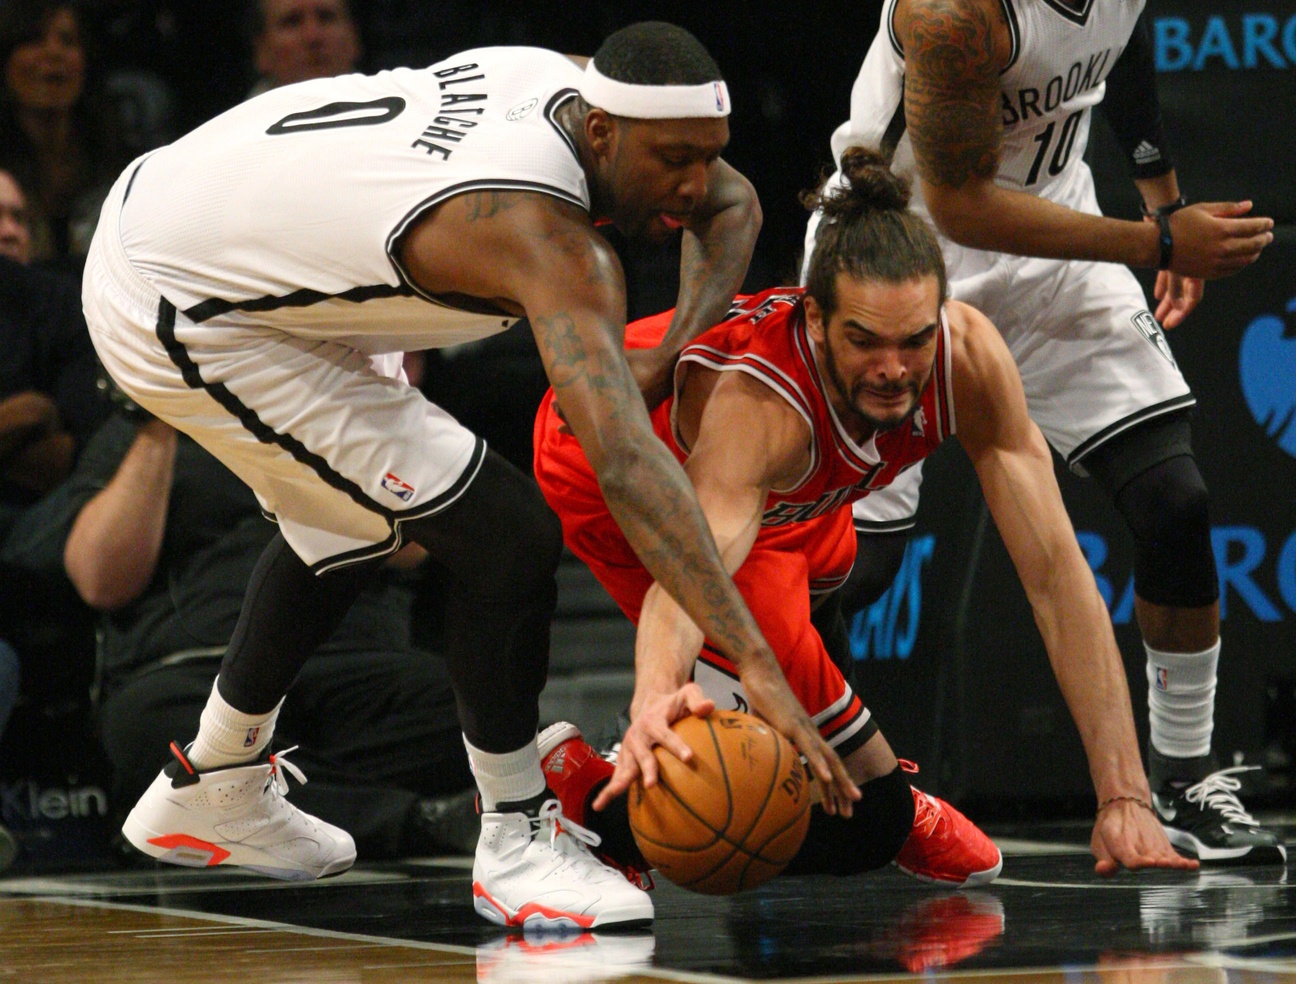 The Bulls and Nets will be a hard-nosed matchup. Photo via Noah K. Murray